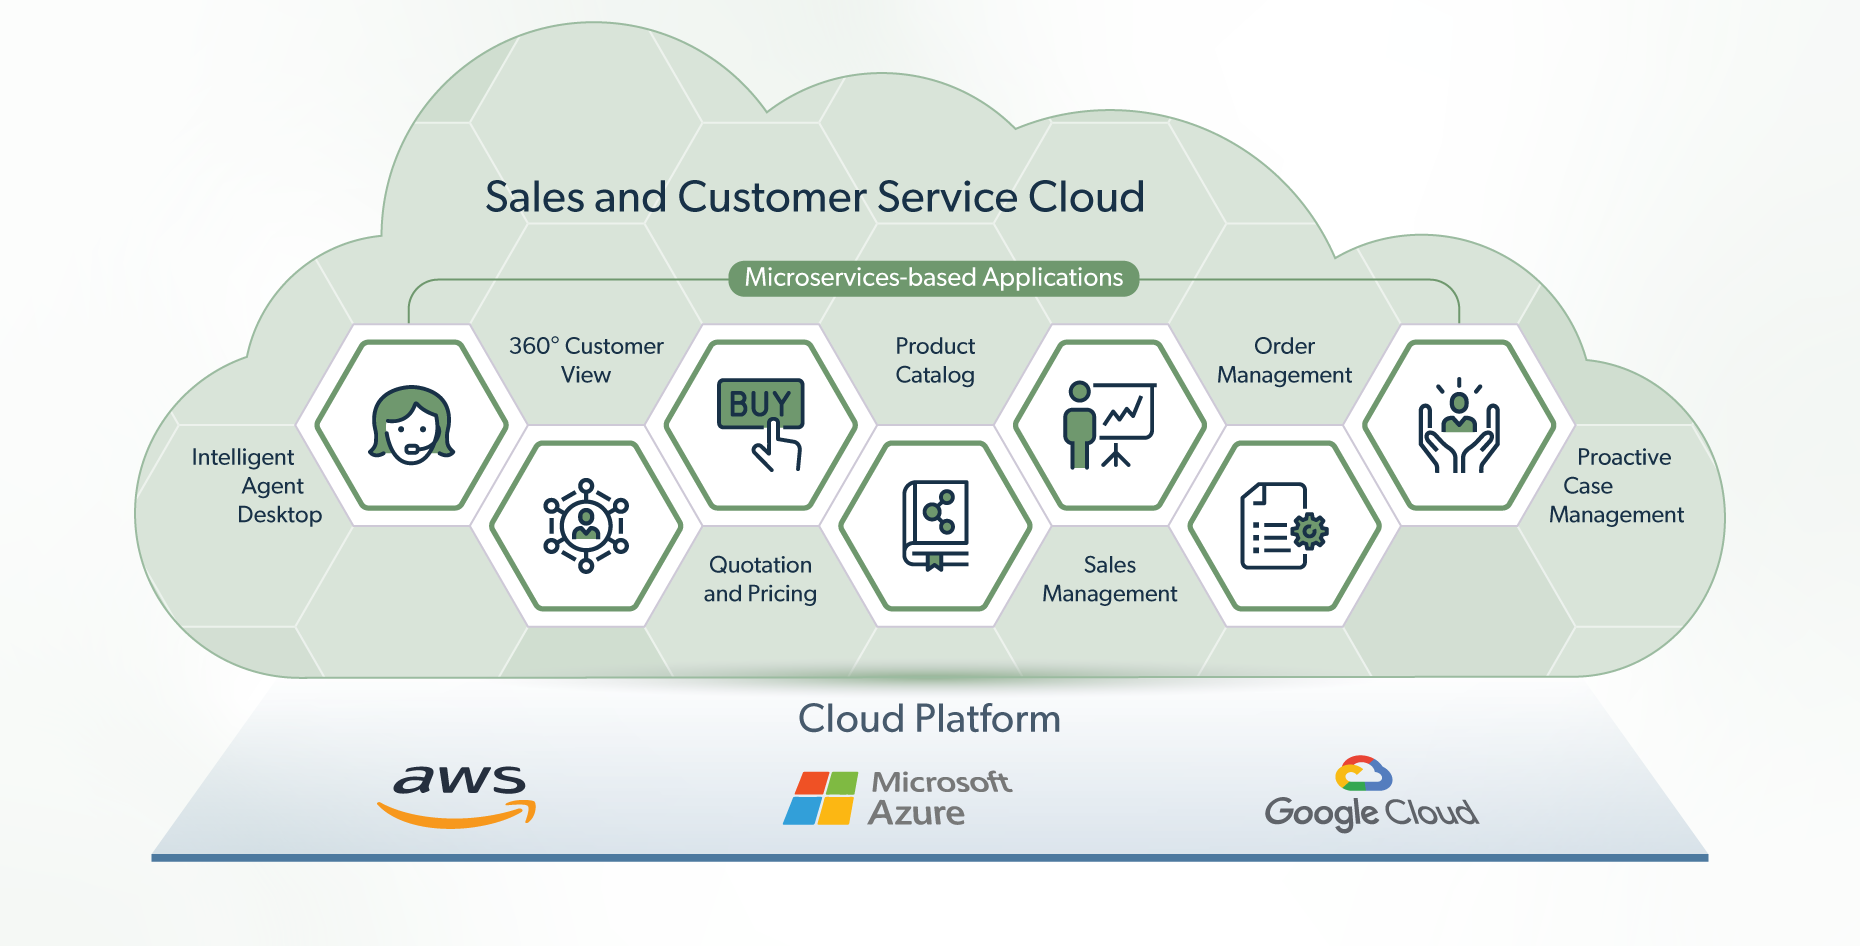 Sales and Customer Service Cloud